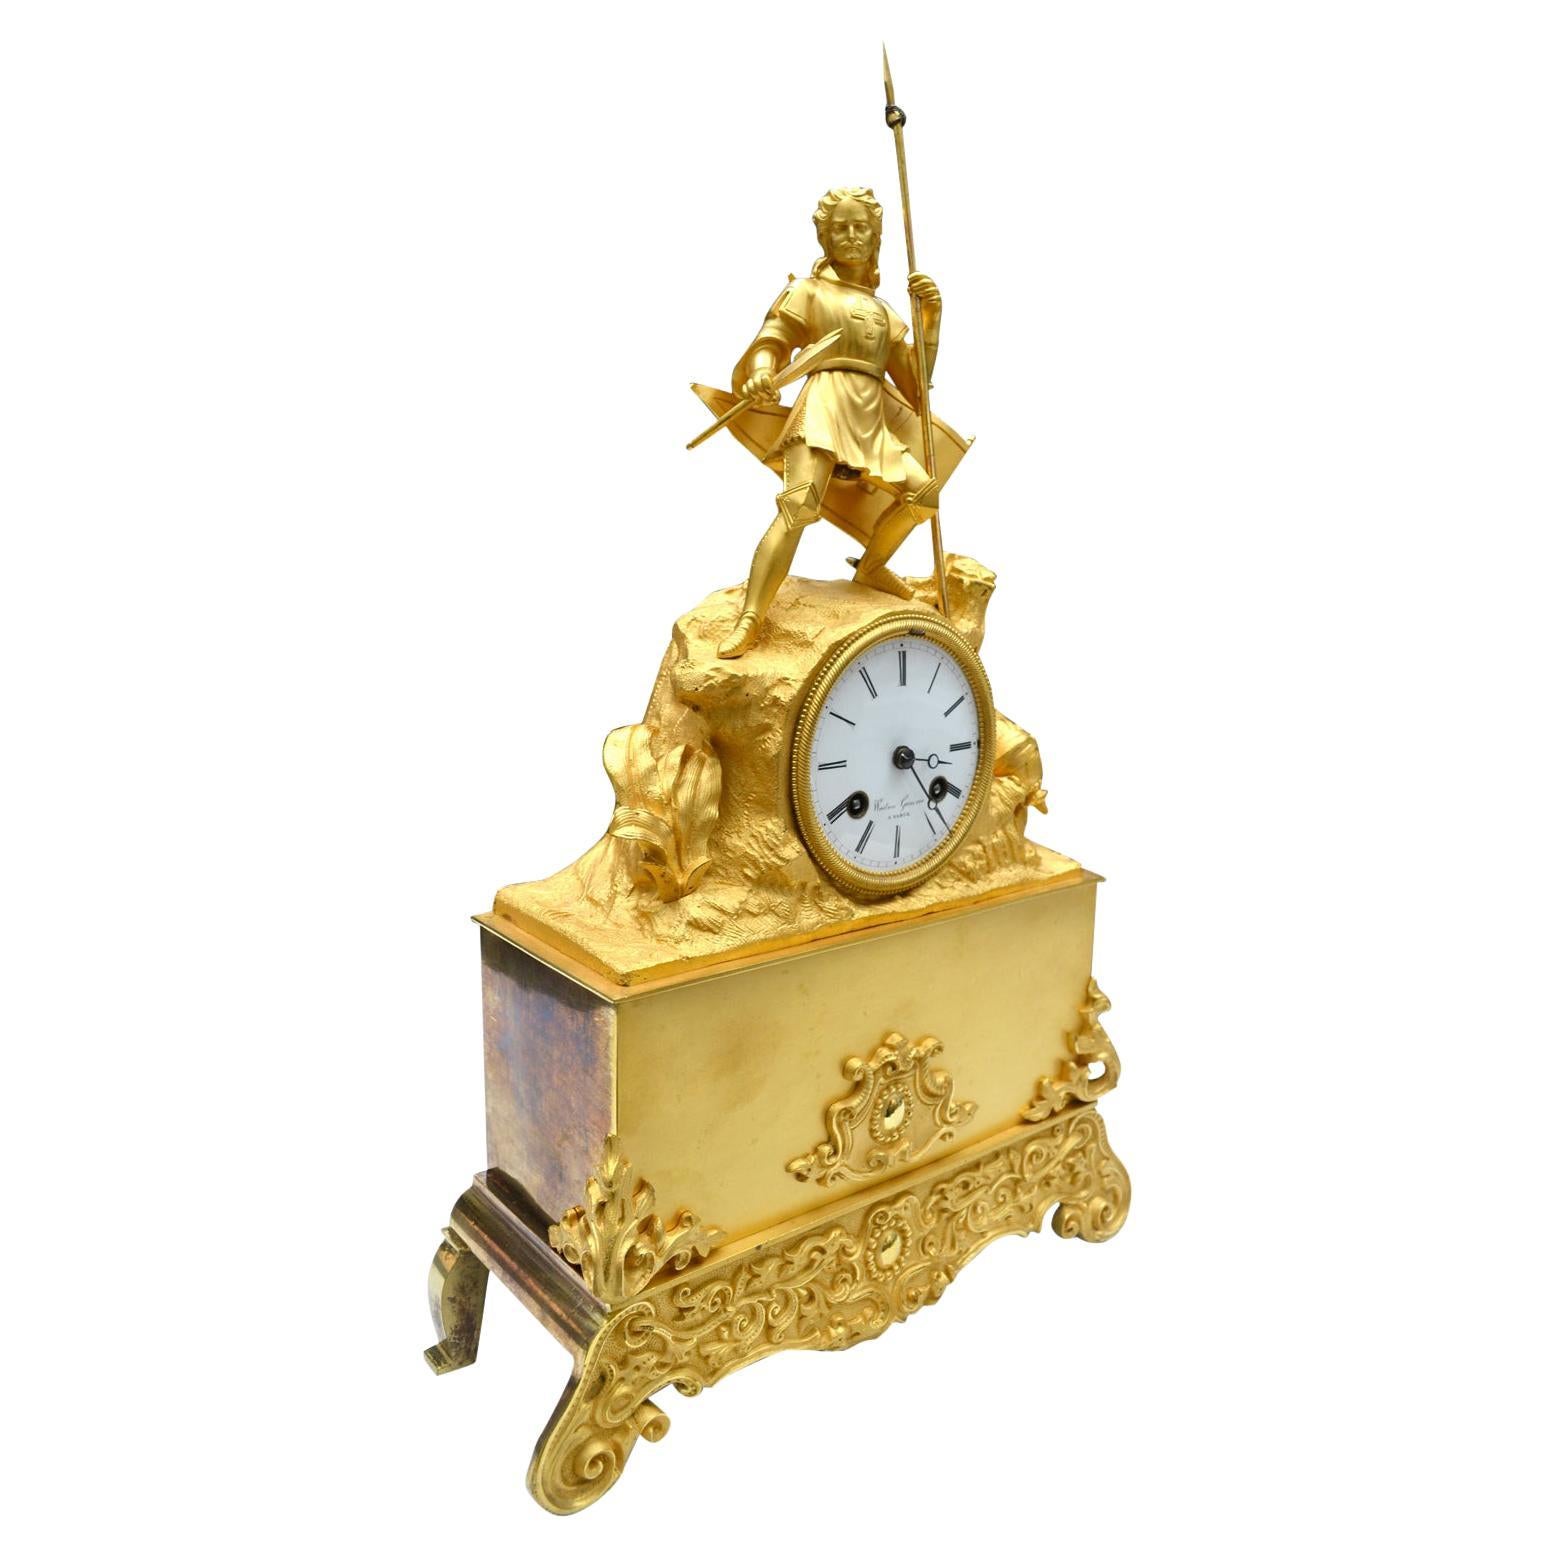 Napoleon III Gilt Bronze Clock of a  Victorious Crusader Knight  in Battle For Sale